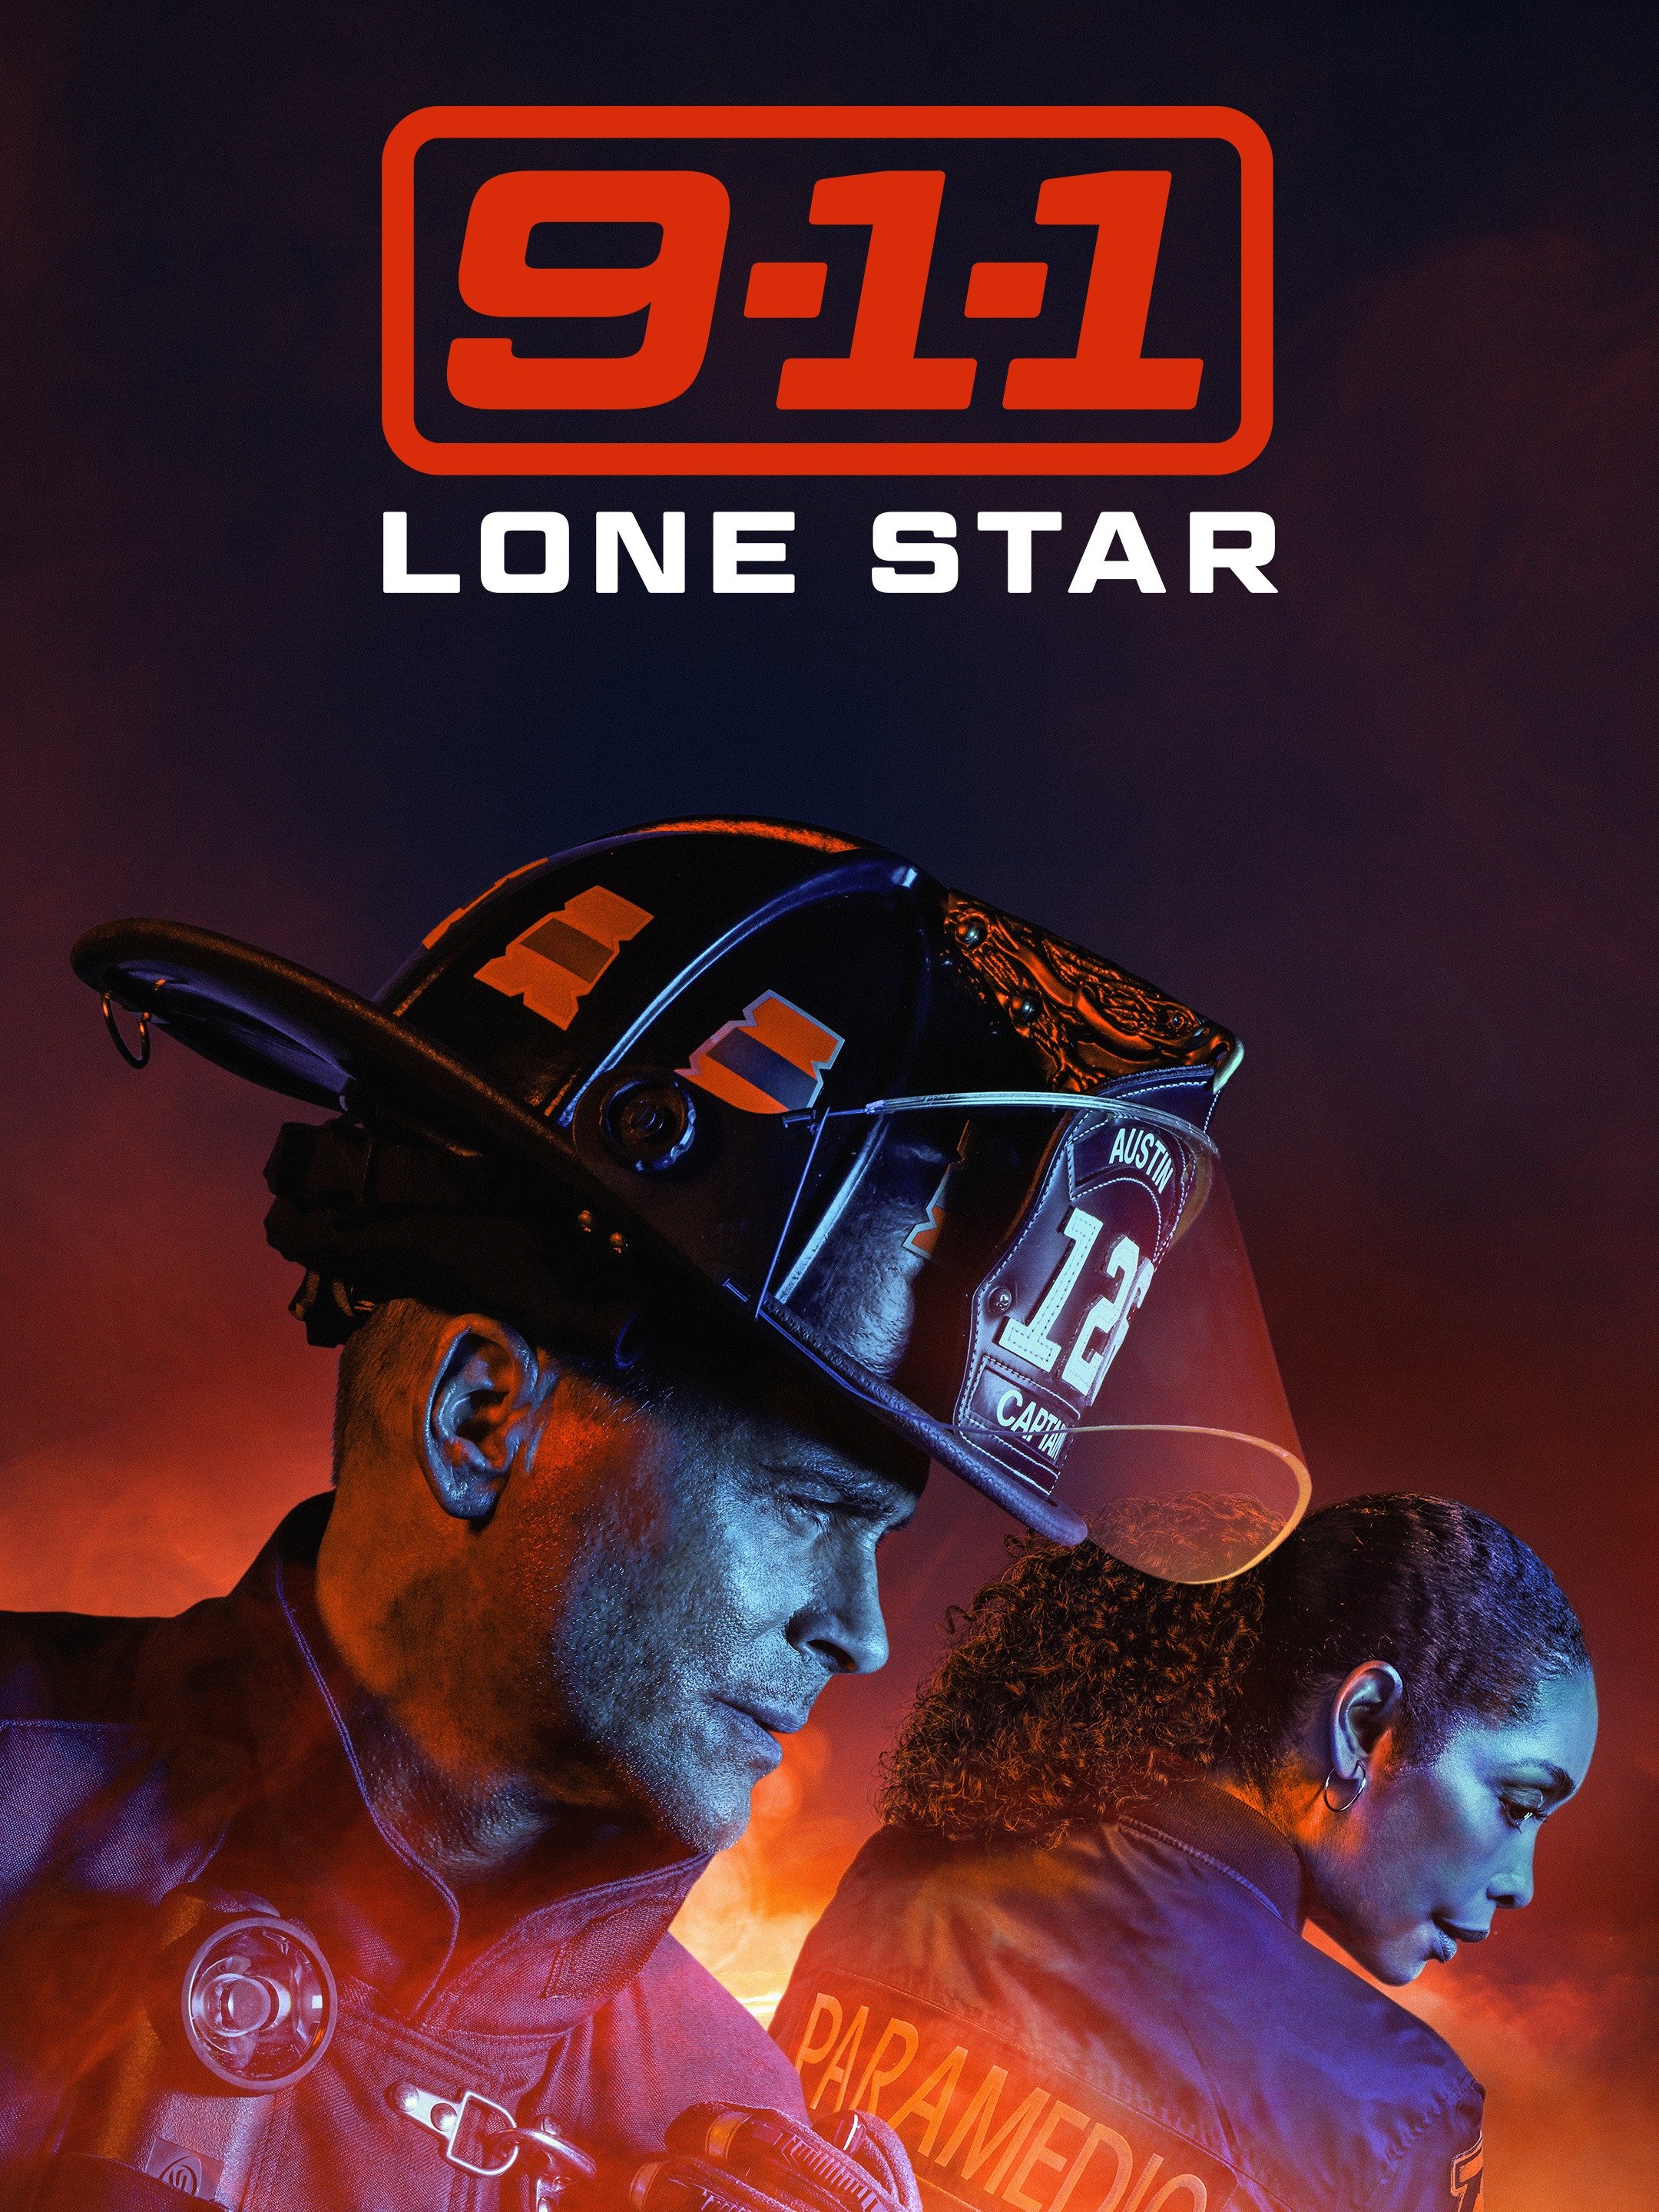 911 Lone Star Rotten Tomatoes